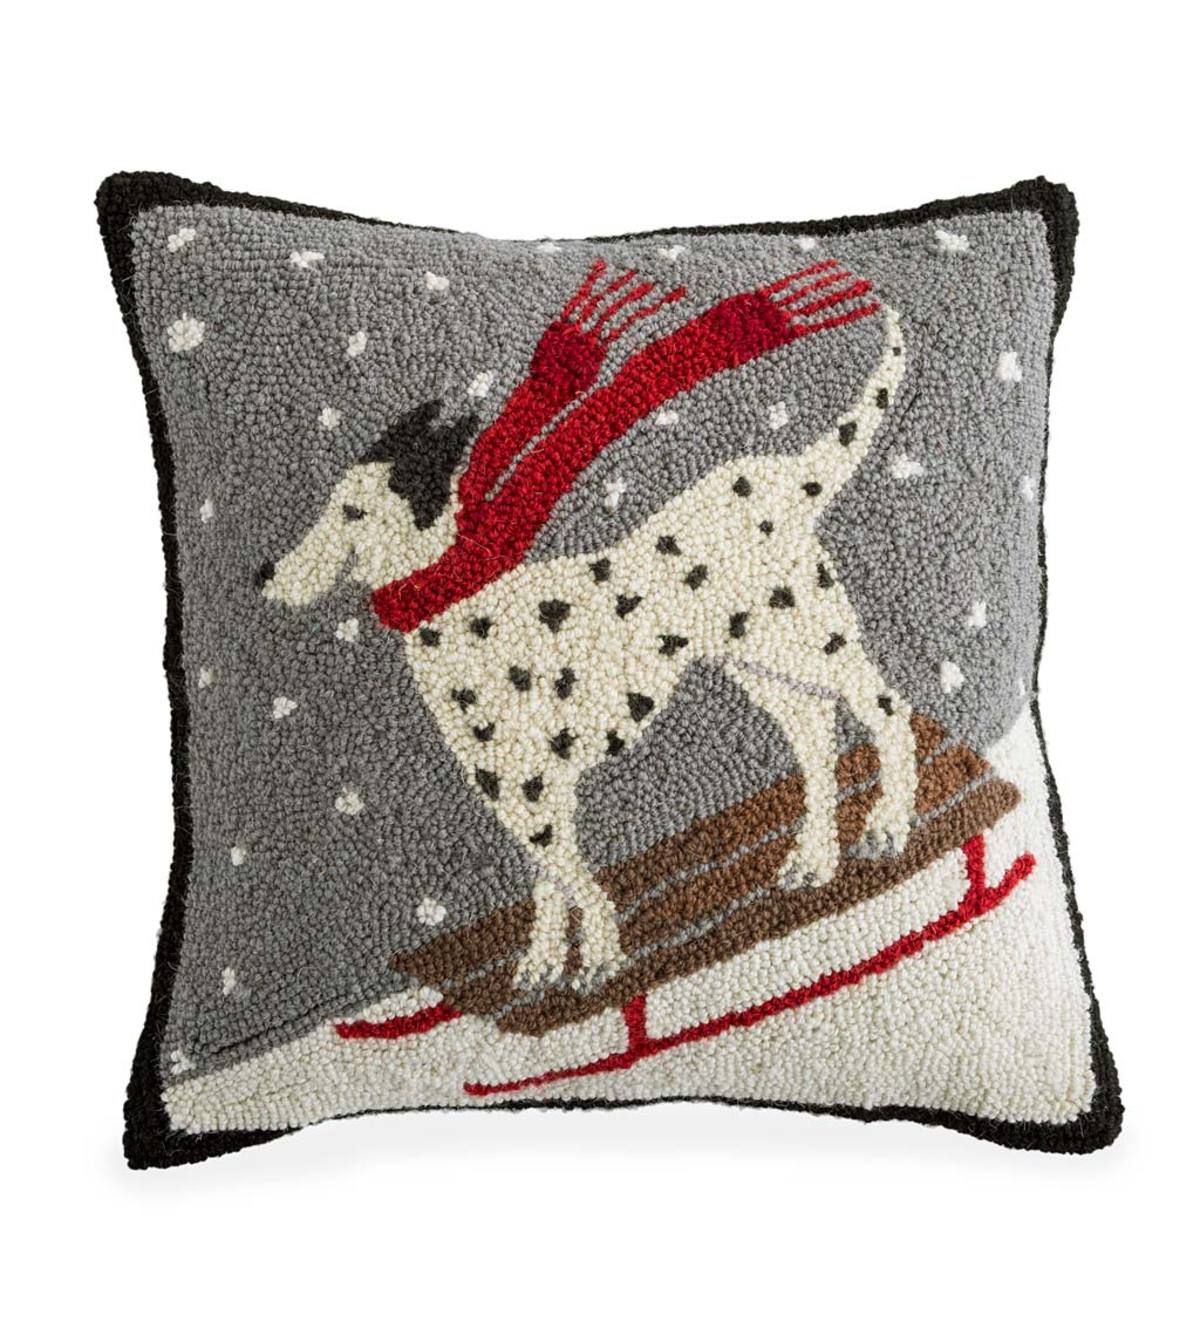 Hand-Hooked Wool Dalmatian Snow Day Throw Pillow